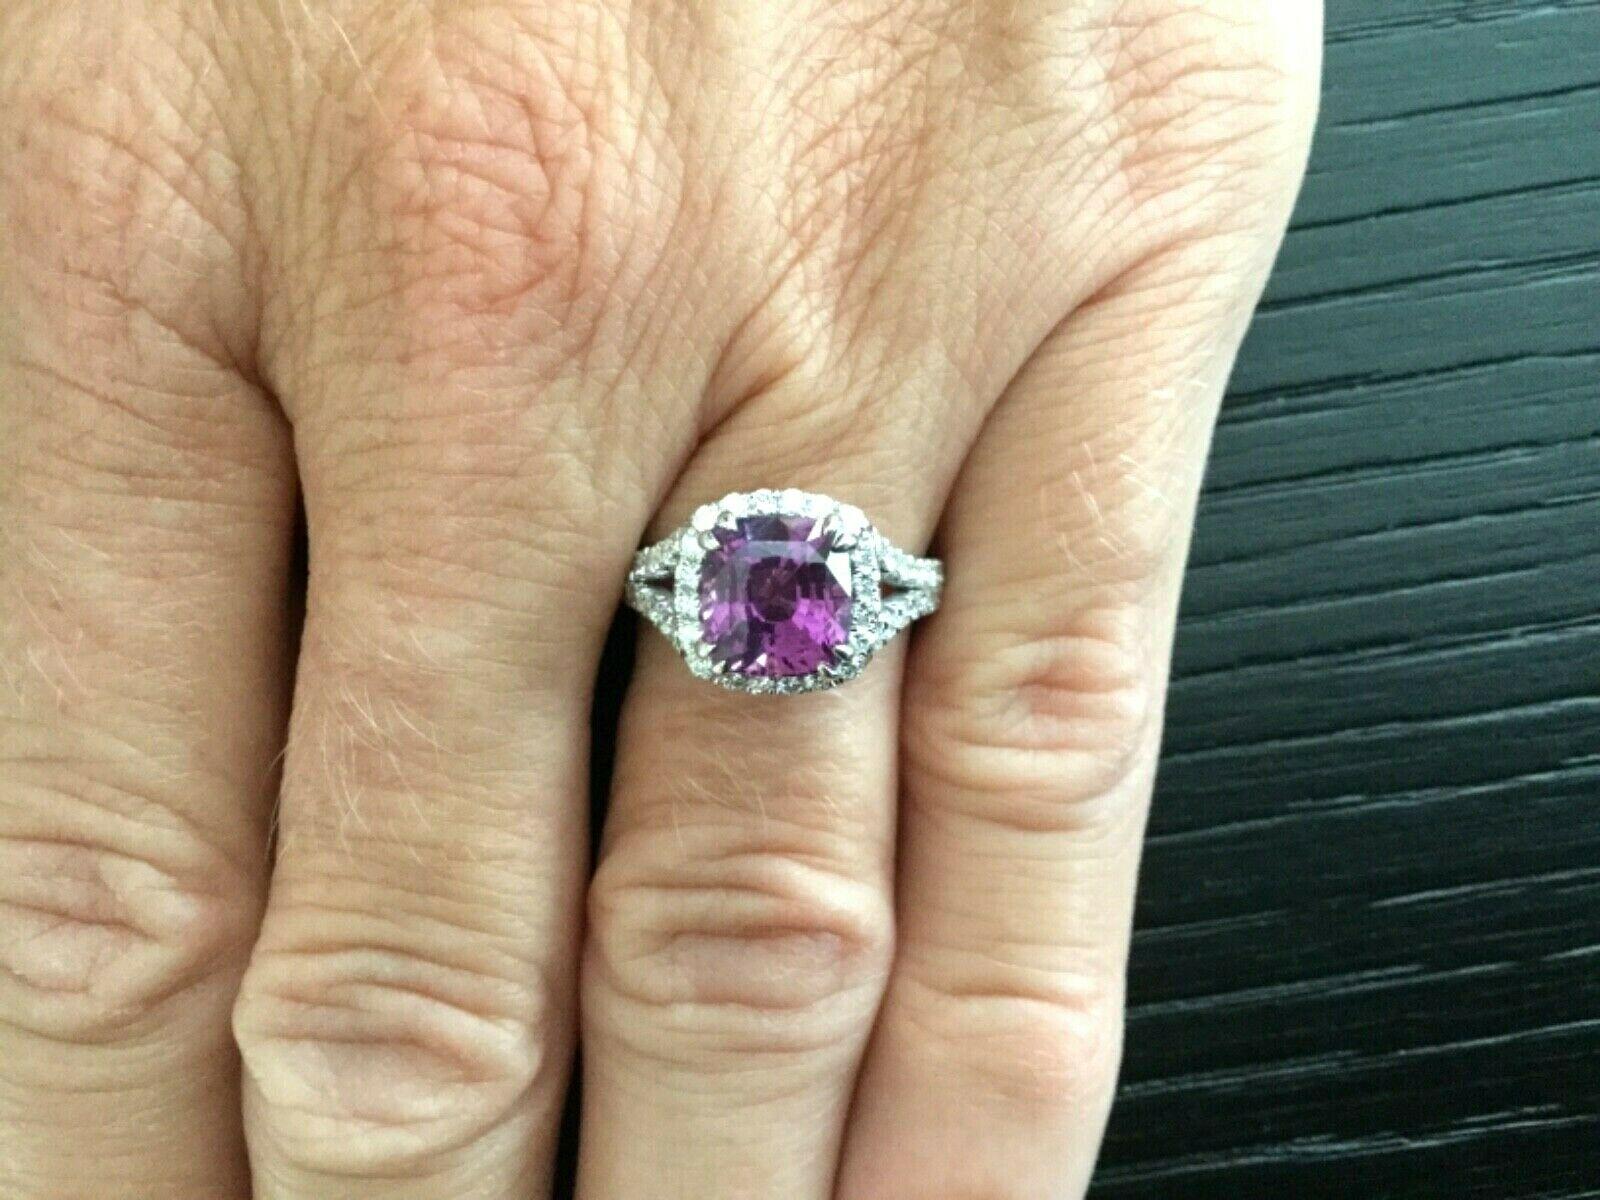 JUST IN TODAY!

Are you looking for a STATEMENT Piece at a great price!  This is the perfect engagement ring or out of this world cocktail ring.  This one will light up a room!  In addition it is a TRUE investment grade being UNHEATED and 100%